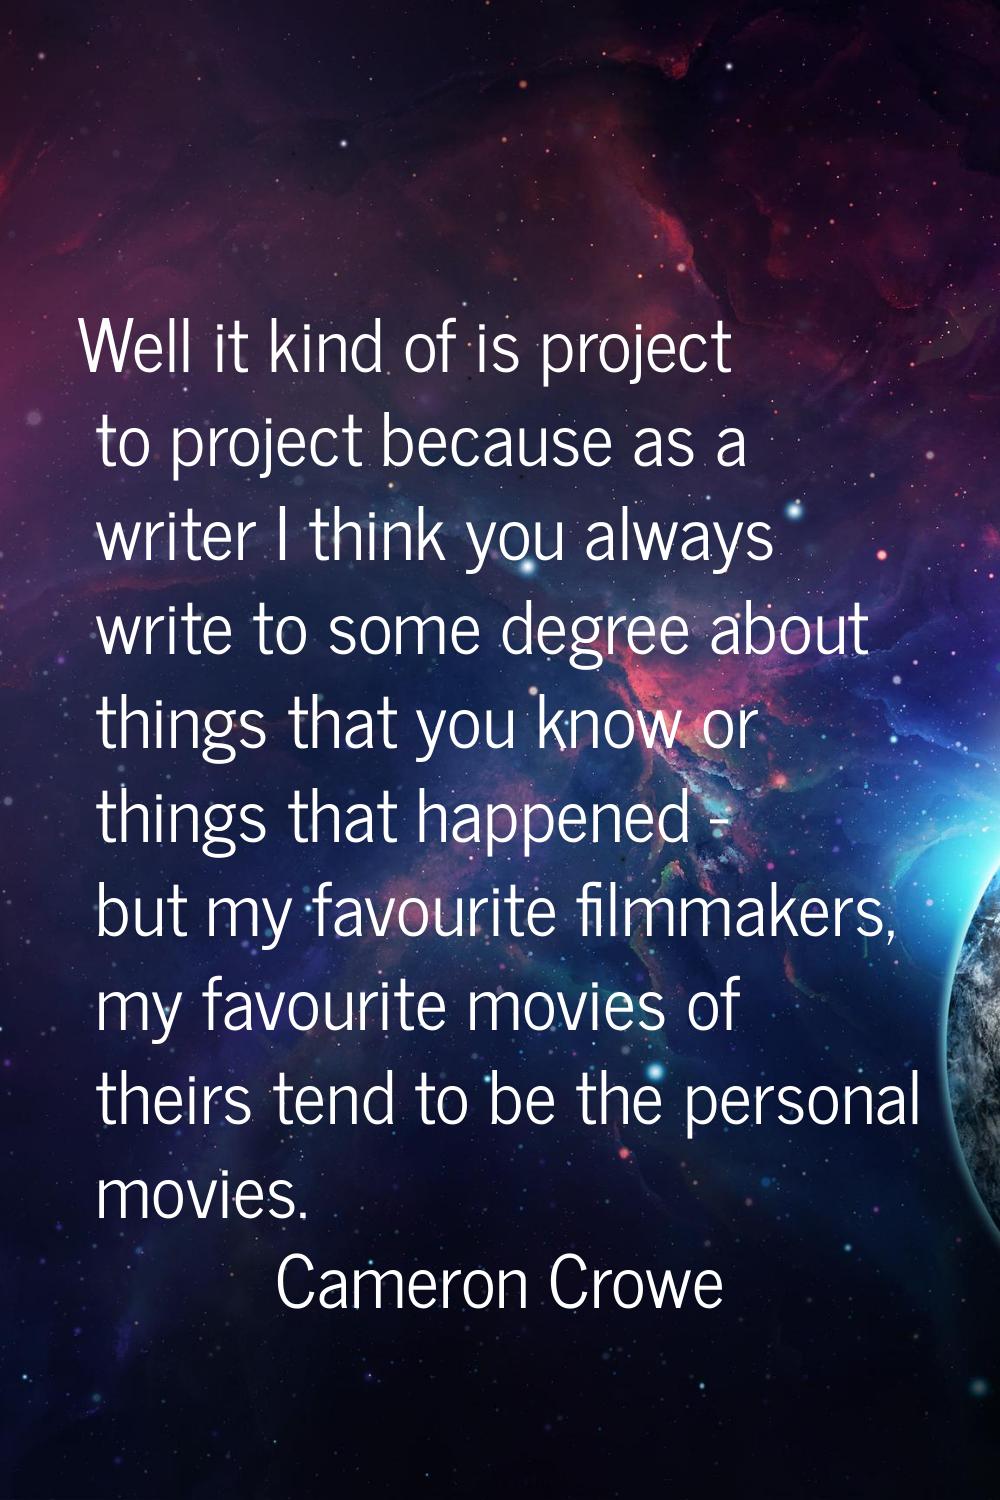 Well it kind of is project to project because as a writer I think you always write to some degree a